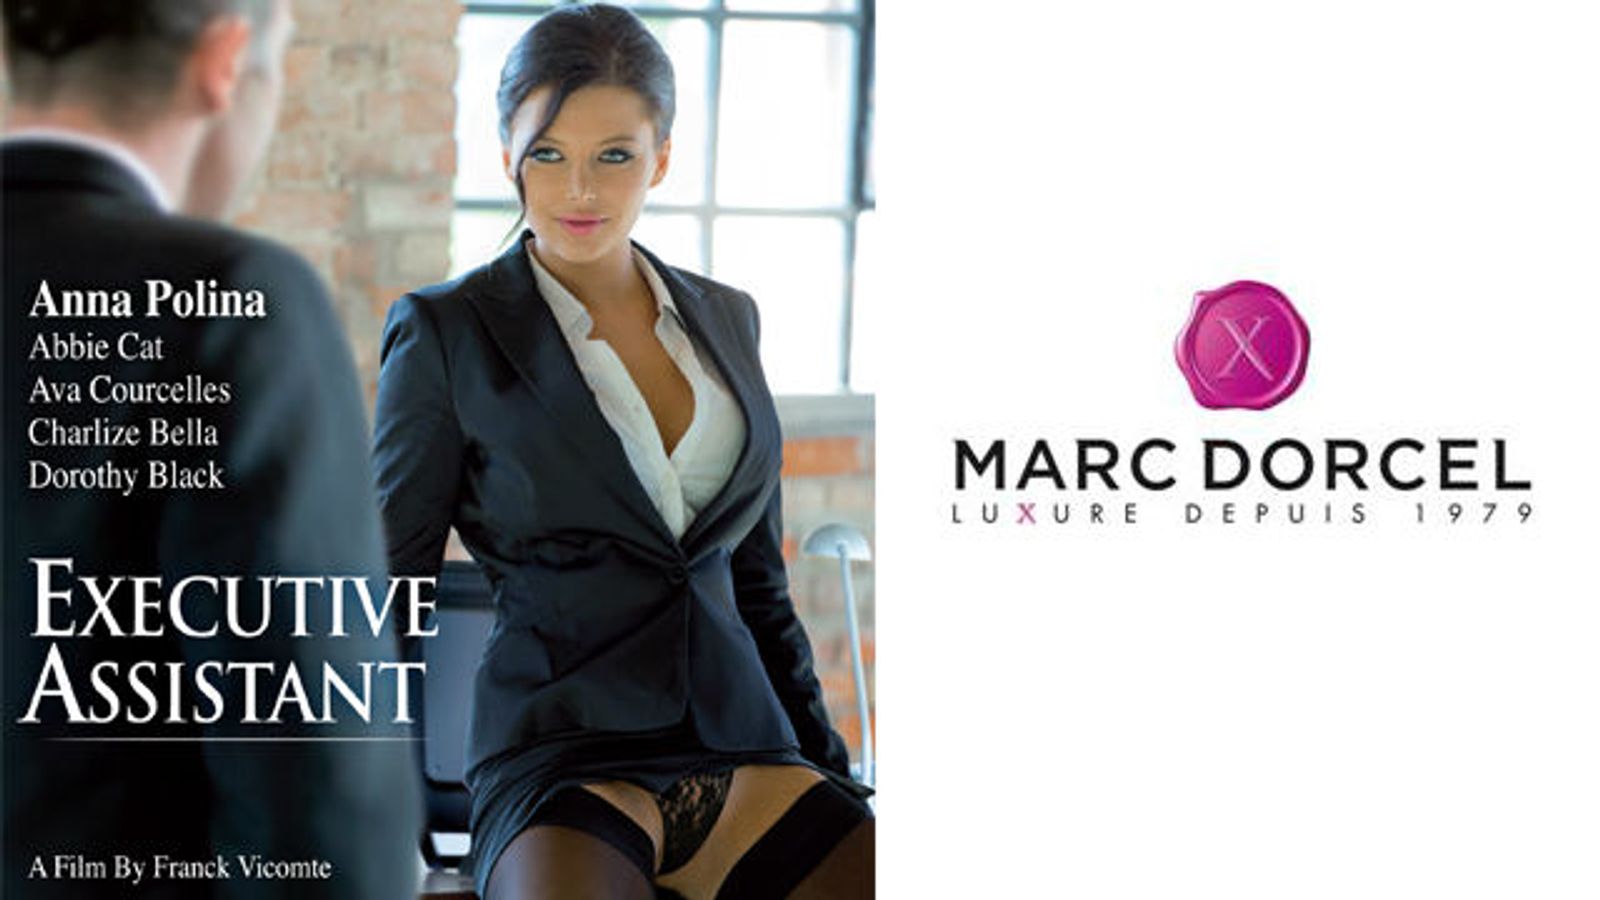 Marc Dorcel Heats Up March with Anna Polina, Lola Reve photo